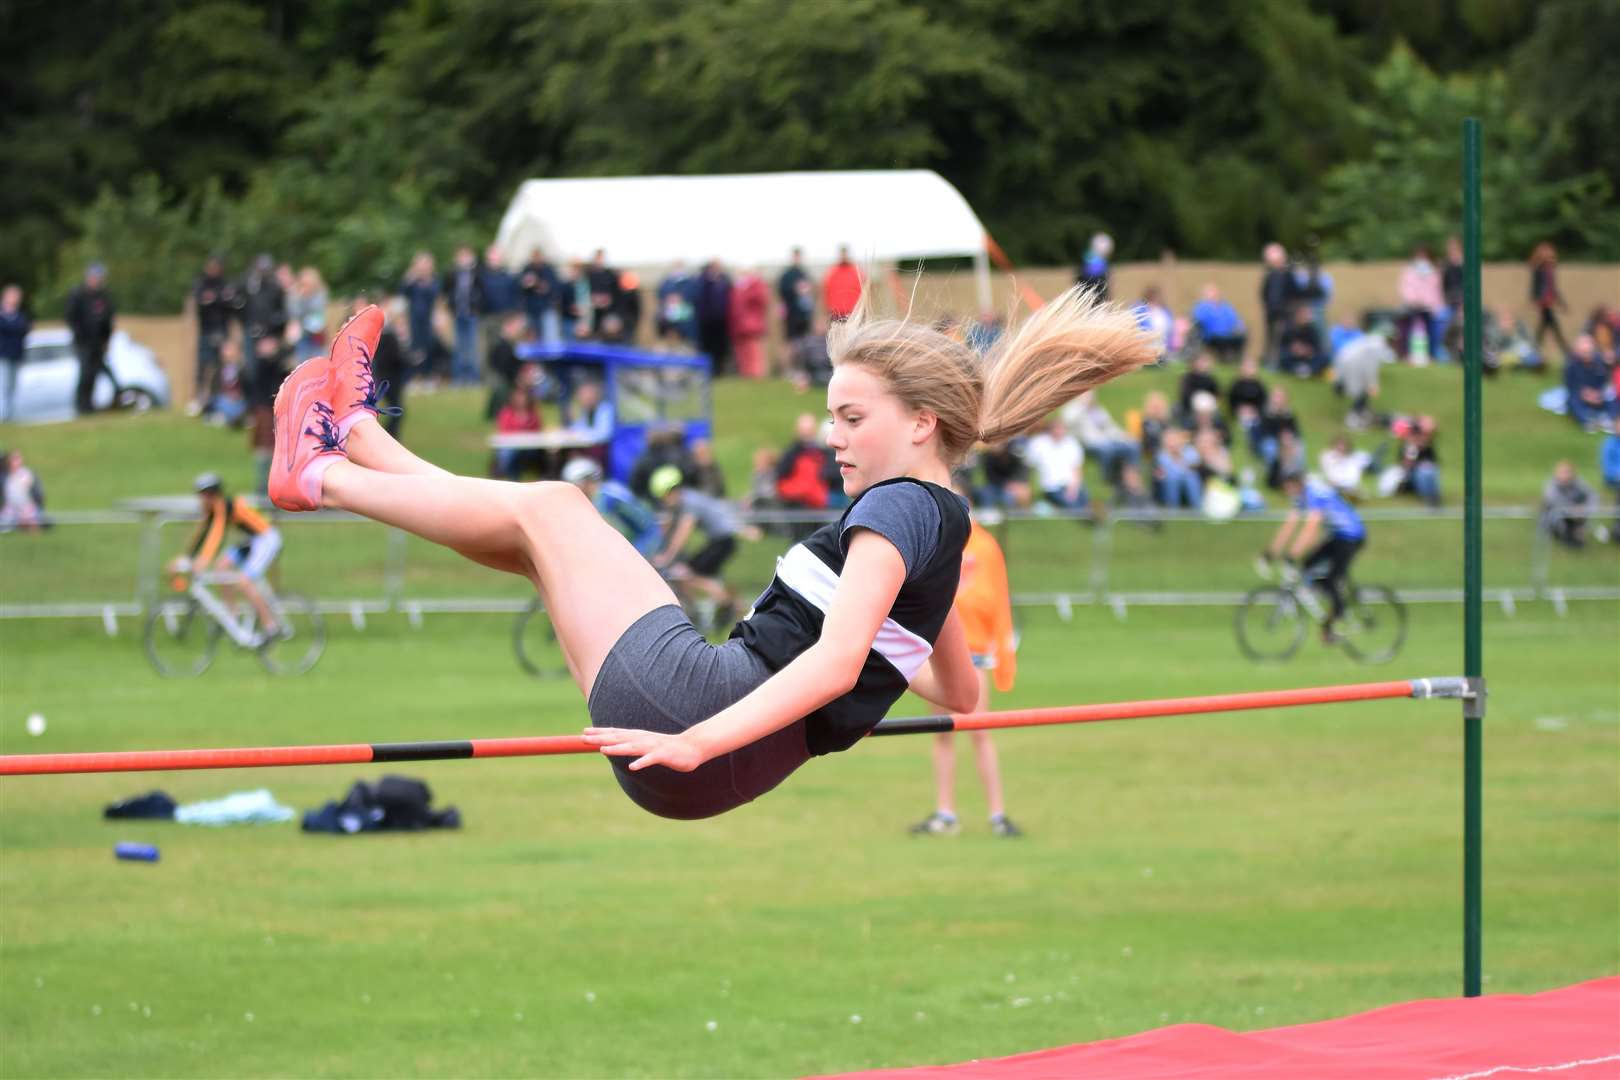 Eilidh Henderson from Elgin competing in the high jump at Forres Highland Games in 2019. Picture: Becky Saunderson. Image No.044383.